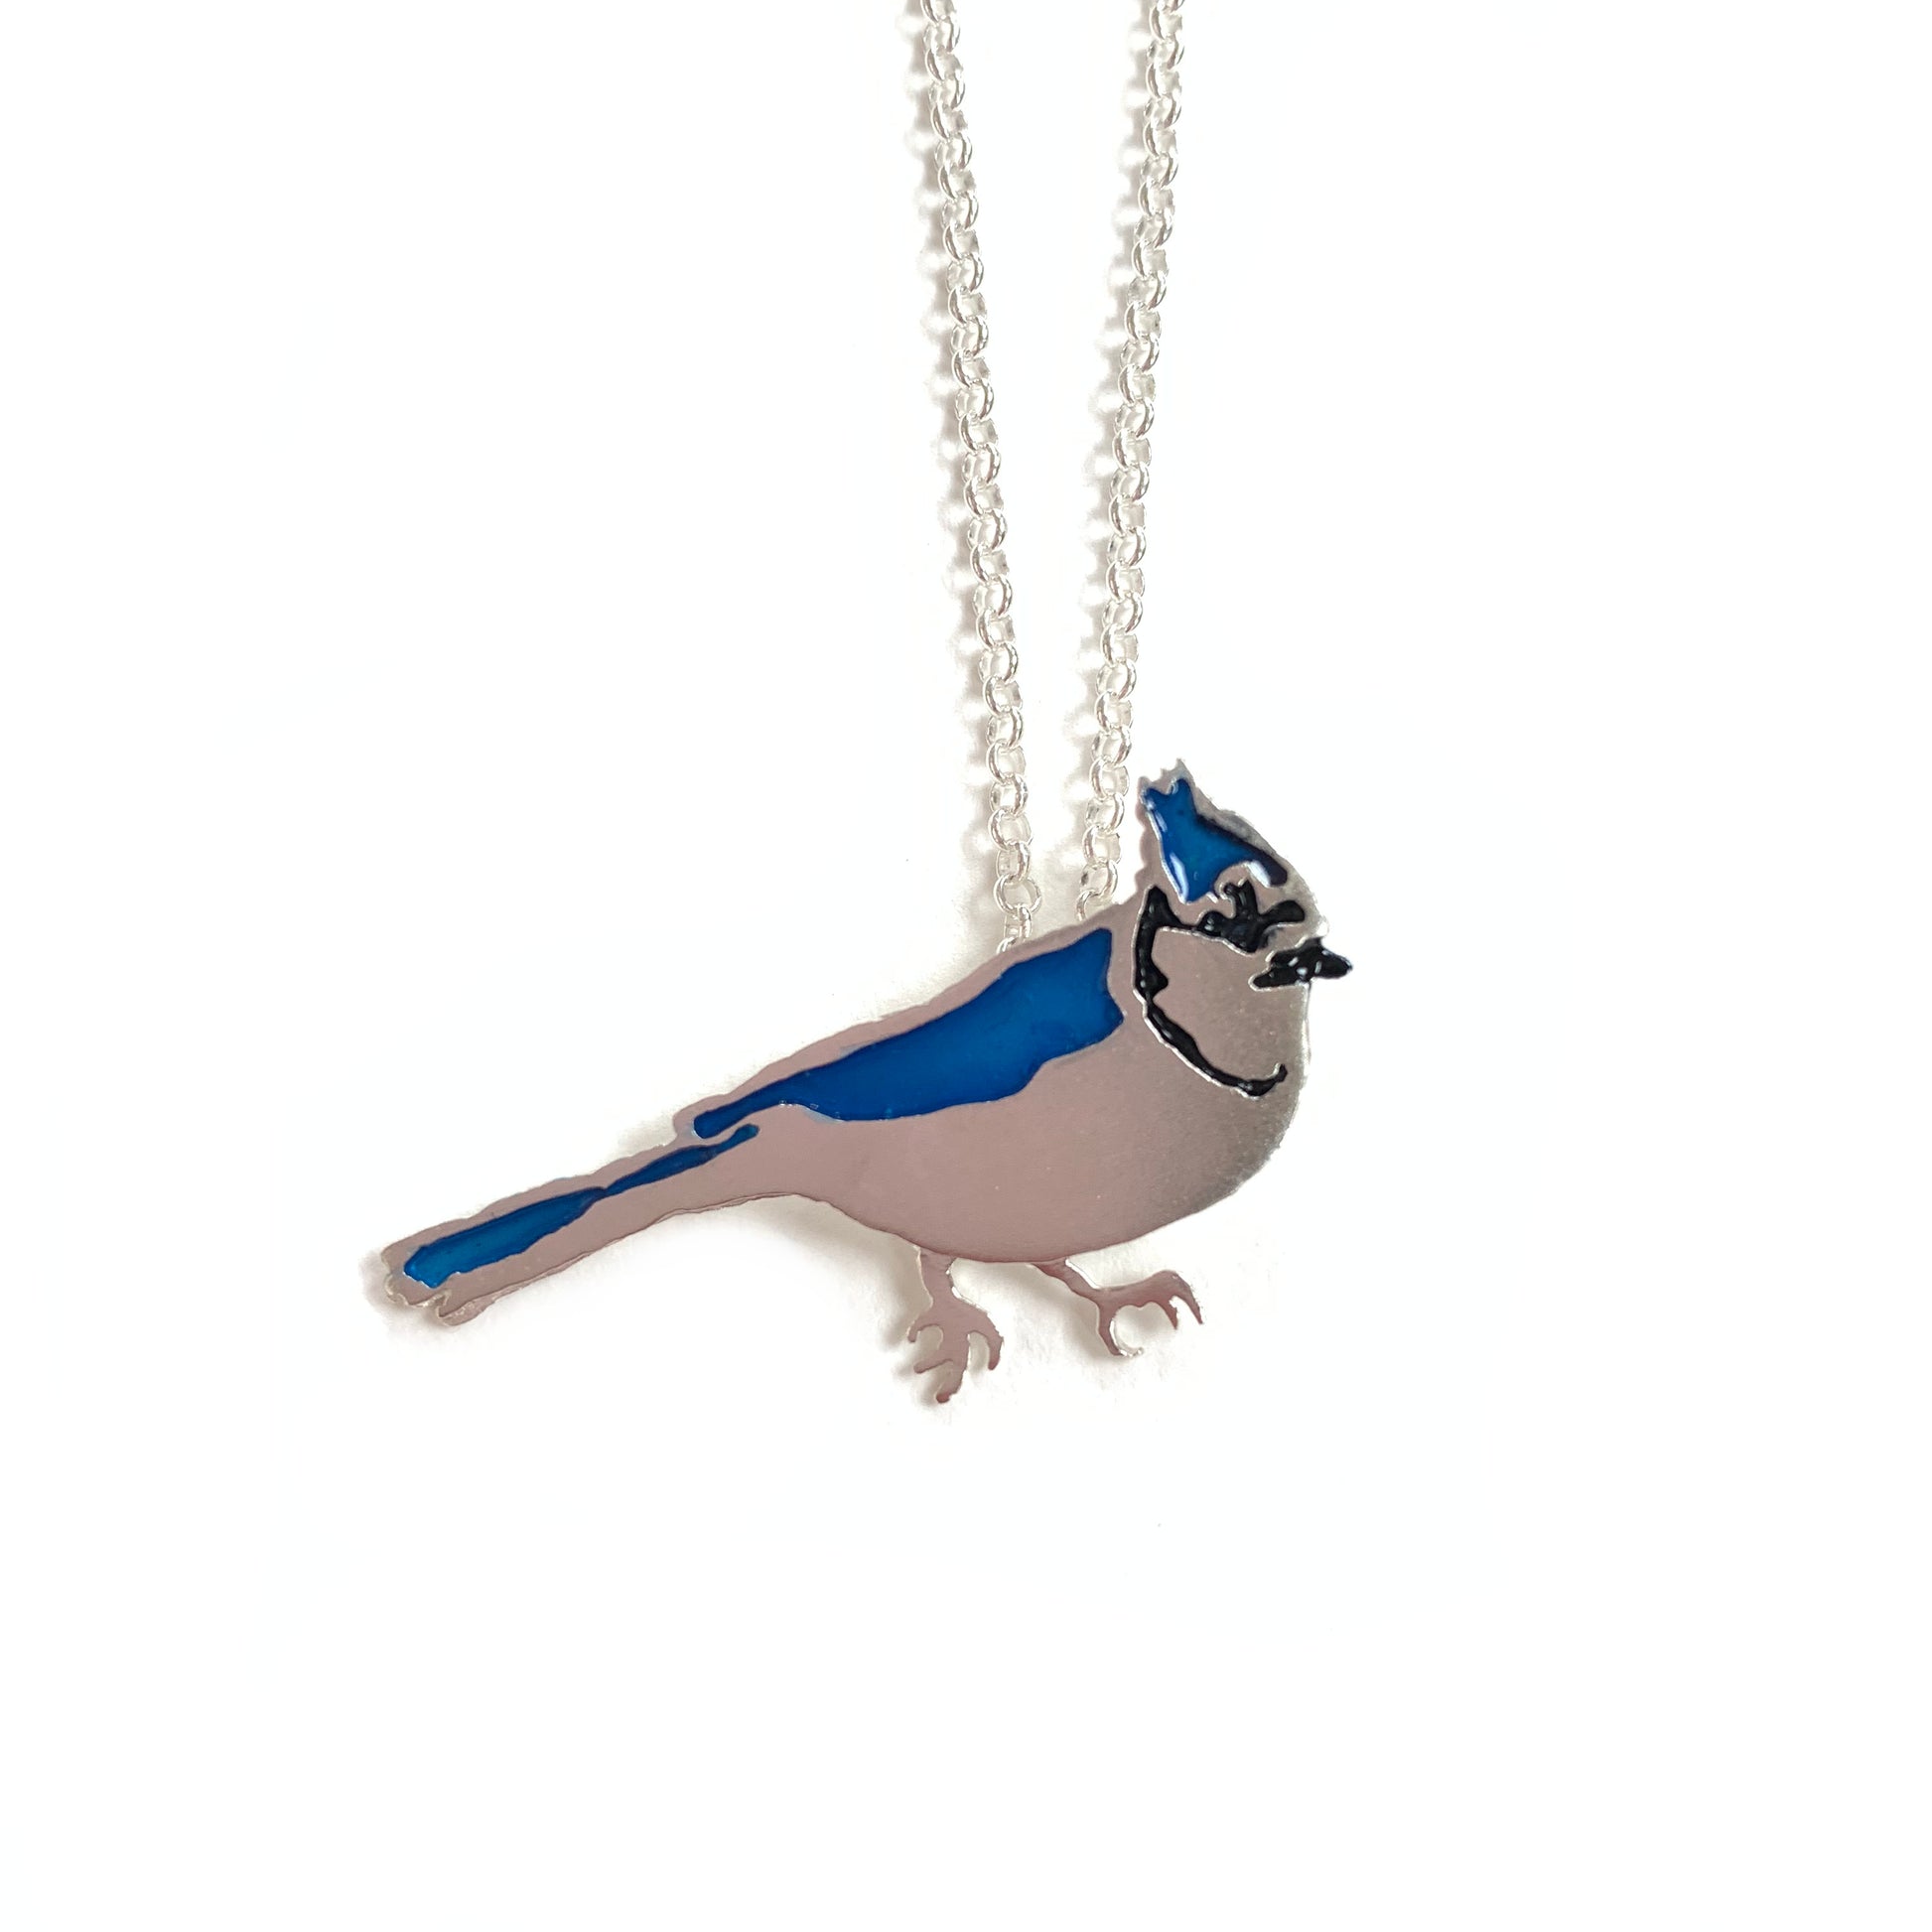 Made in Canada sterling silver bluejay necklace with blue and black enamel accents.